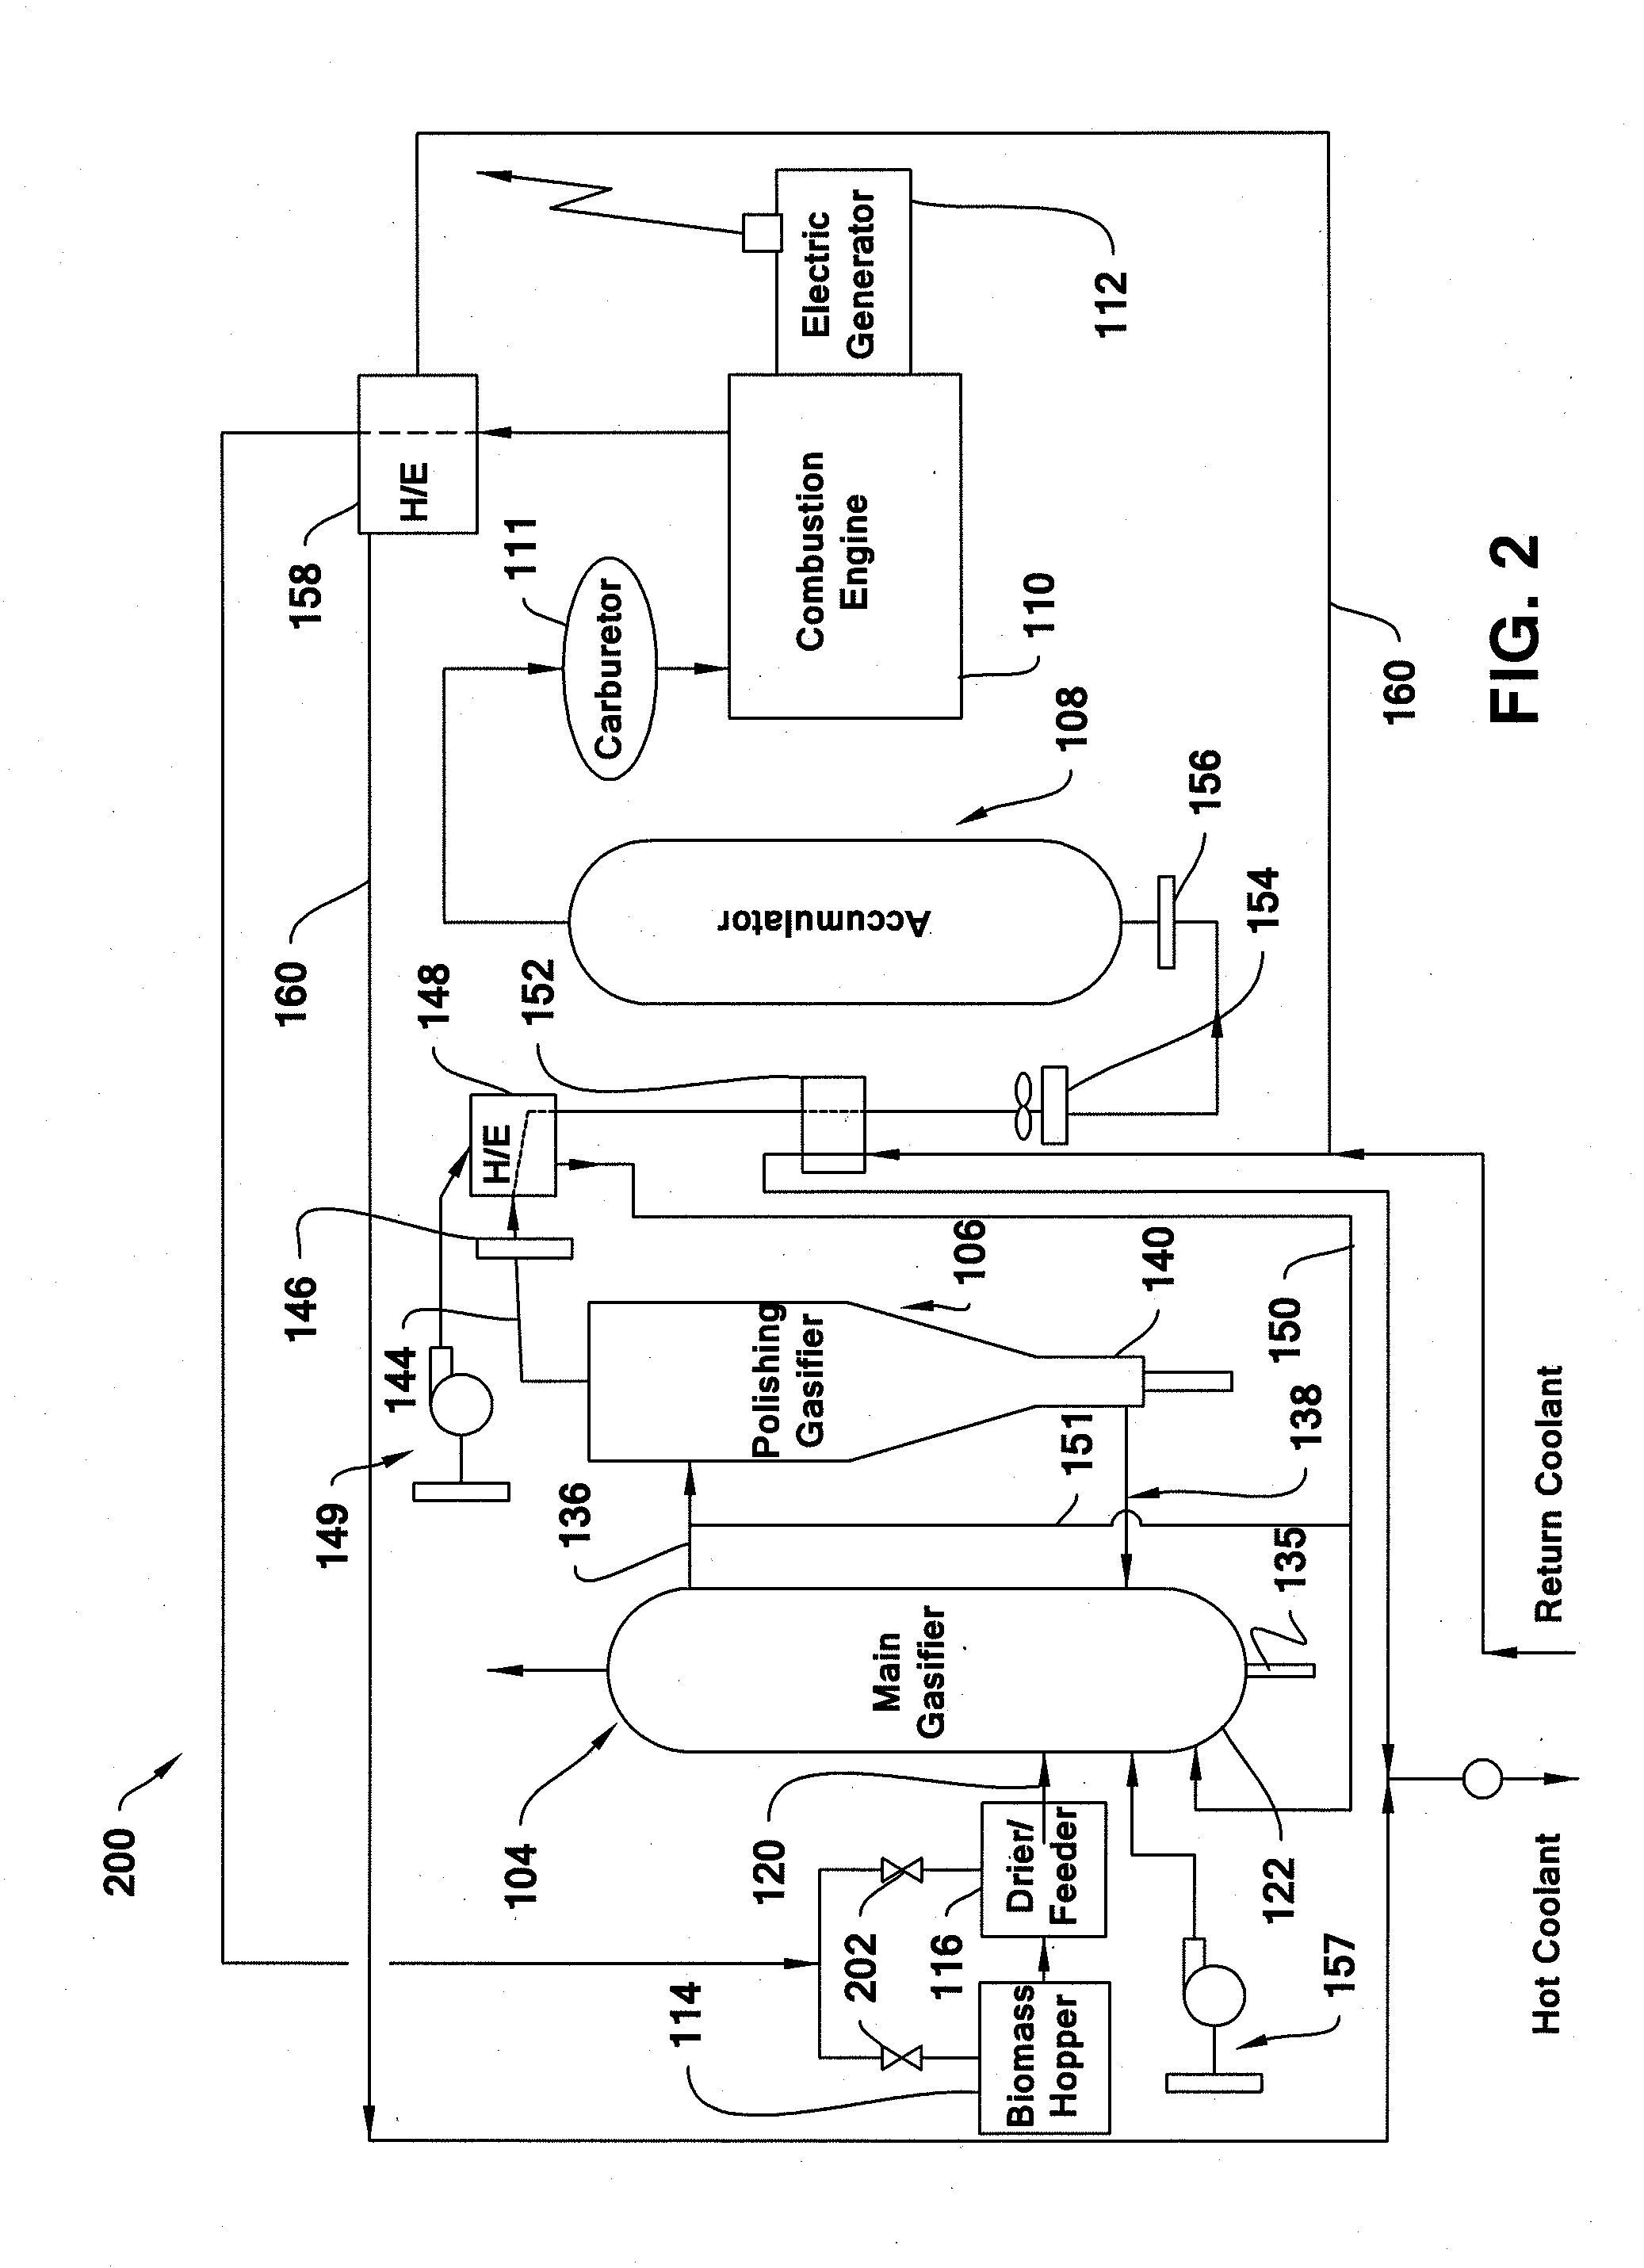 System and process for gasifying biomass products